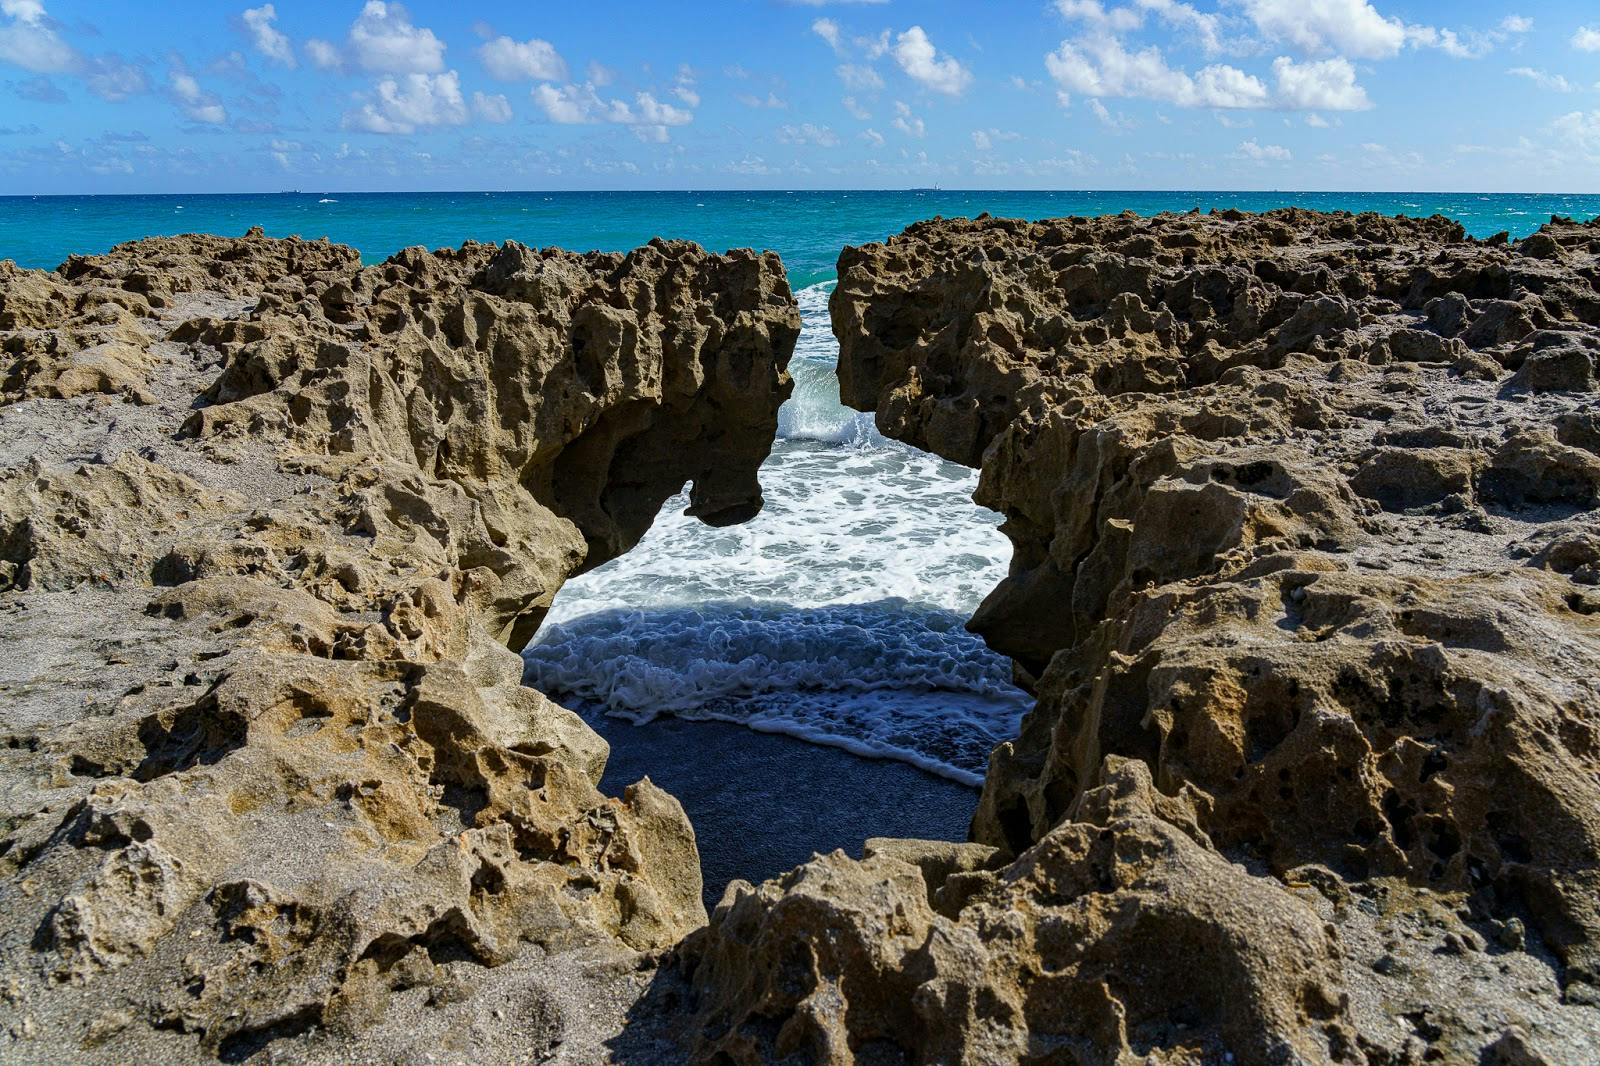 Image - The Nature Conservancy Blowing Rocks Preserve